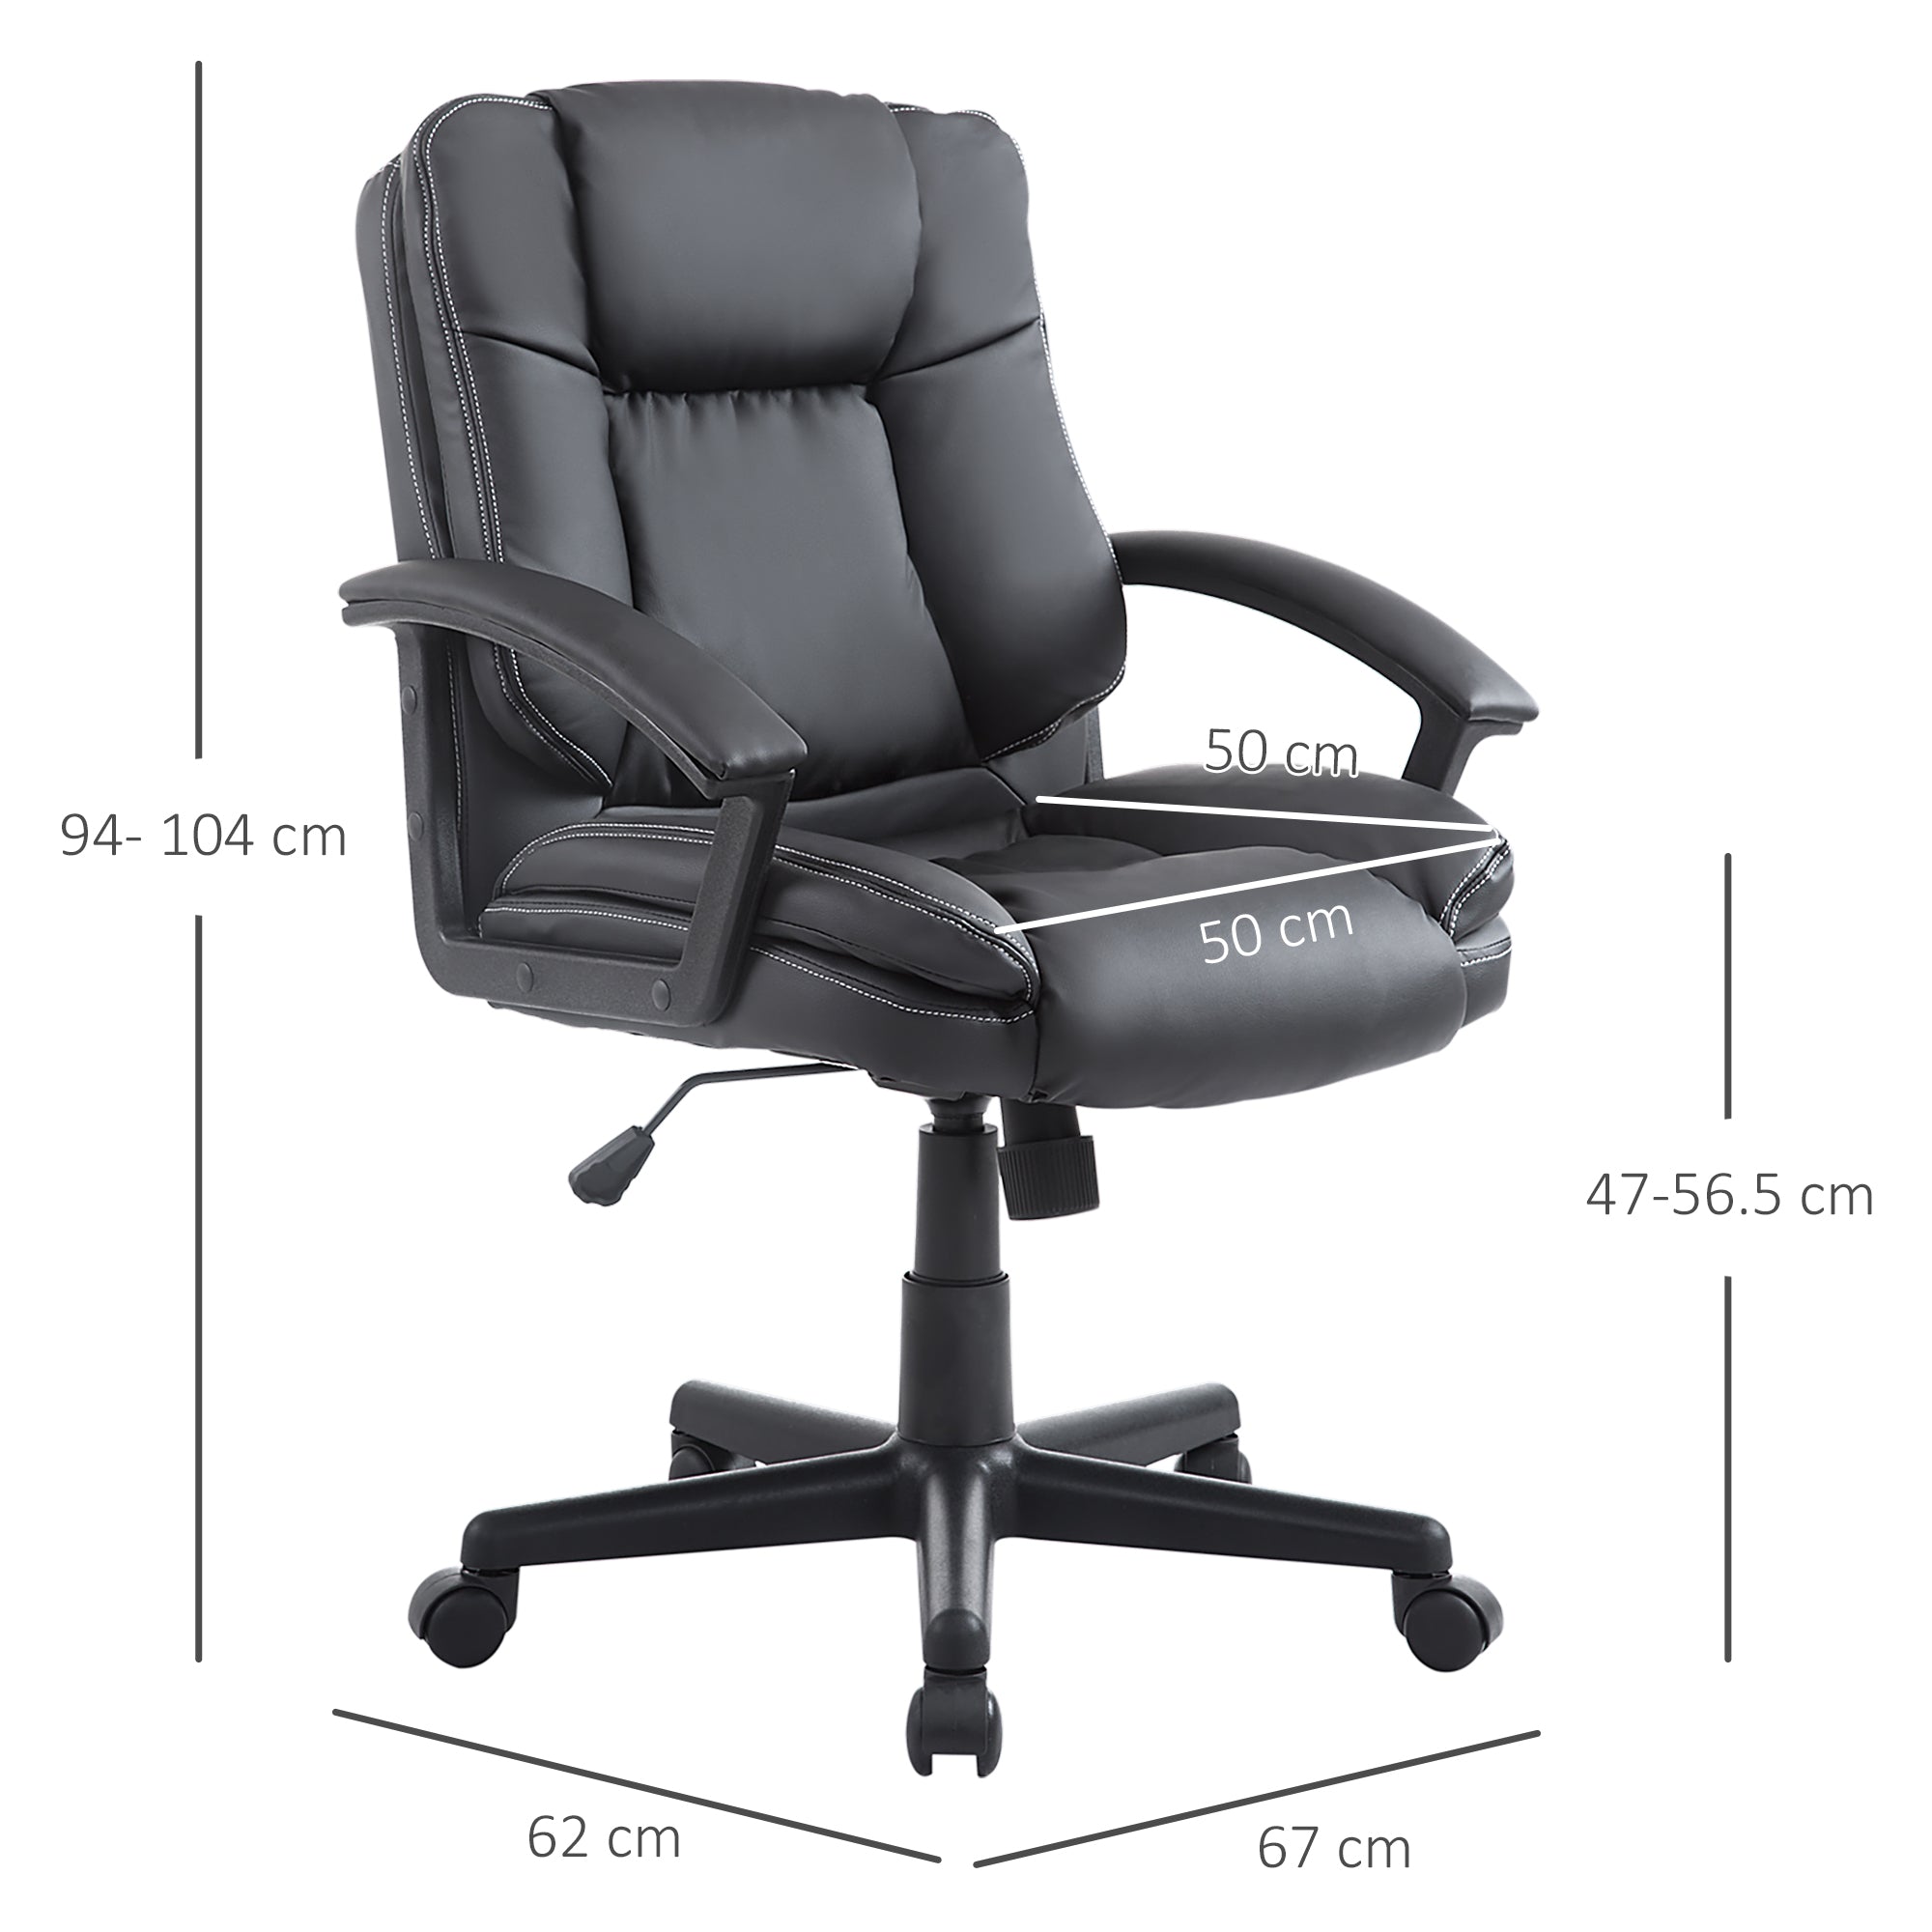 Swivel Executive Office Chair Mid Back Faux Leather Computer Desk Chair for Home with Double-Tier Padding, Arm, Wheels, Black-2